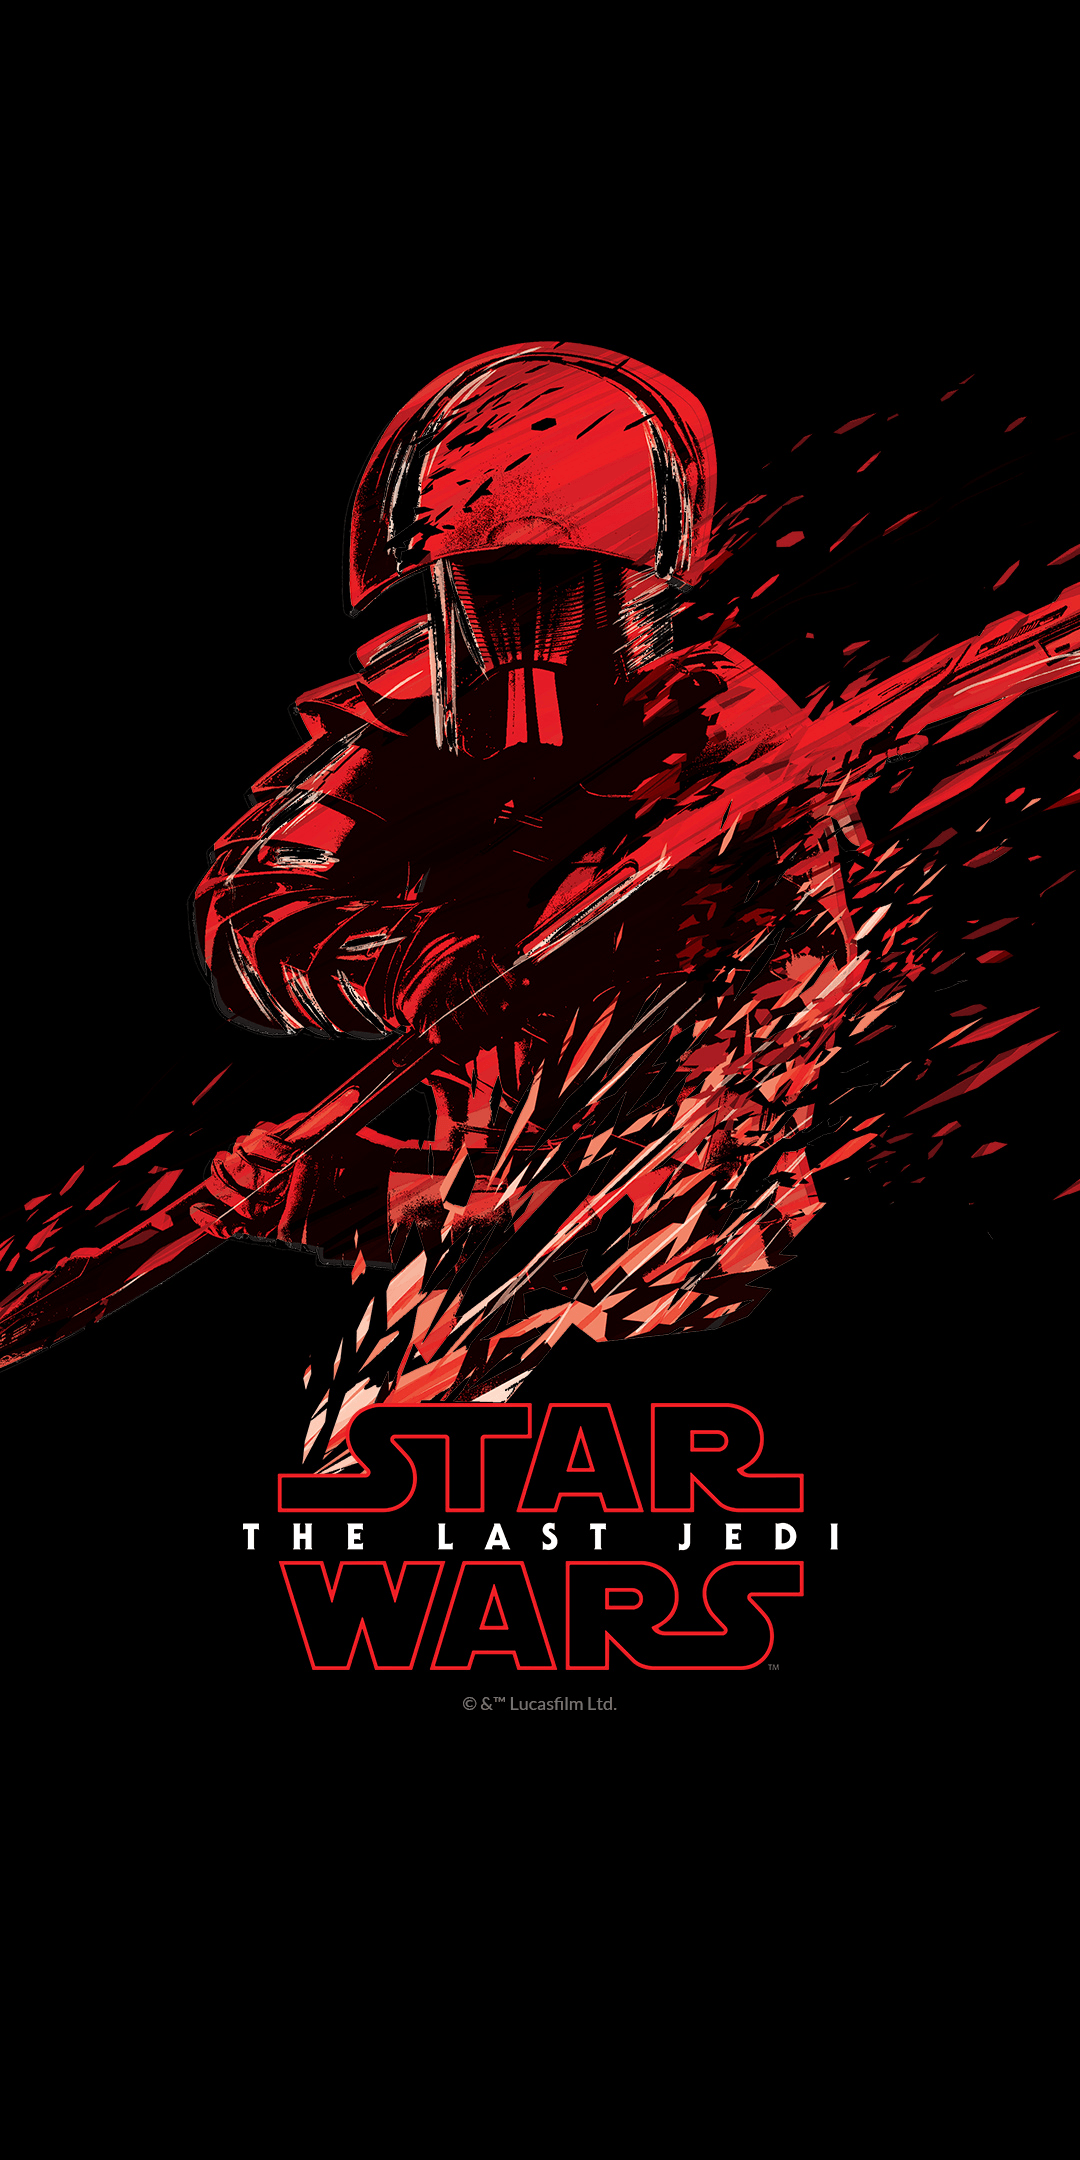 DOWNLOAD: Get your hands on the Star Wars OnePlus wallpaper now!